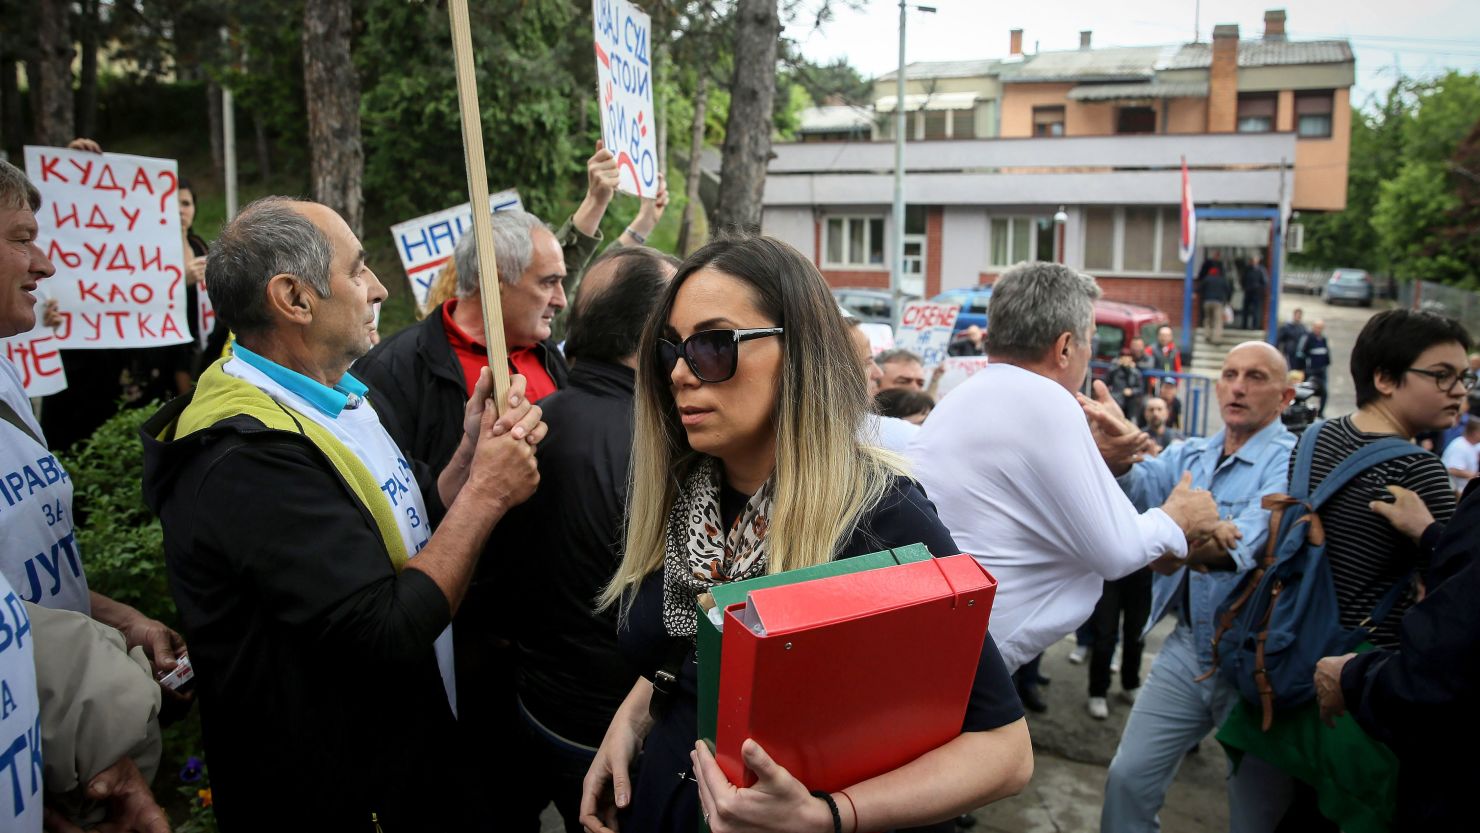 Marija Lukic walks past supporters of Milutin Jelicic as she arrives at a local court to attend the trial for sexual harassment of the former mayor of Brus.